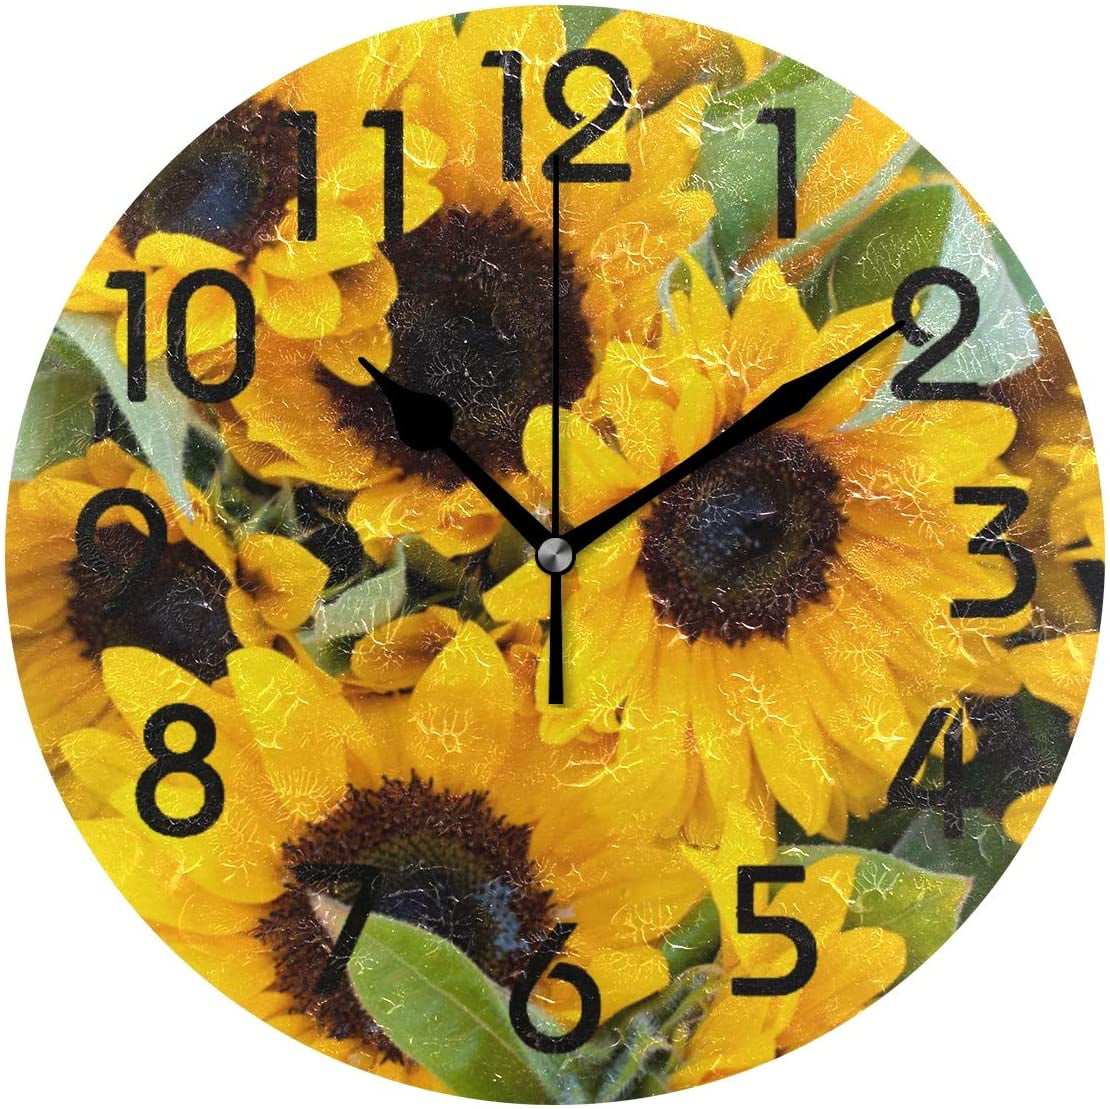 9.5 Inch Battery Operated Quartz Analog Quiet Desk Clock for Home,Office,School Naanle Beautiful Vibrant Sunflowers Vintage Pattern Round Pattern Round Wall Clock 